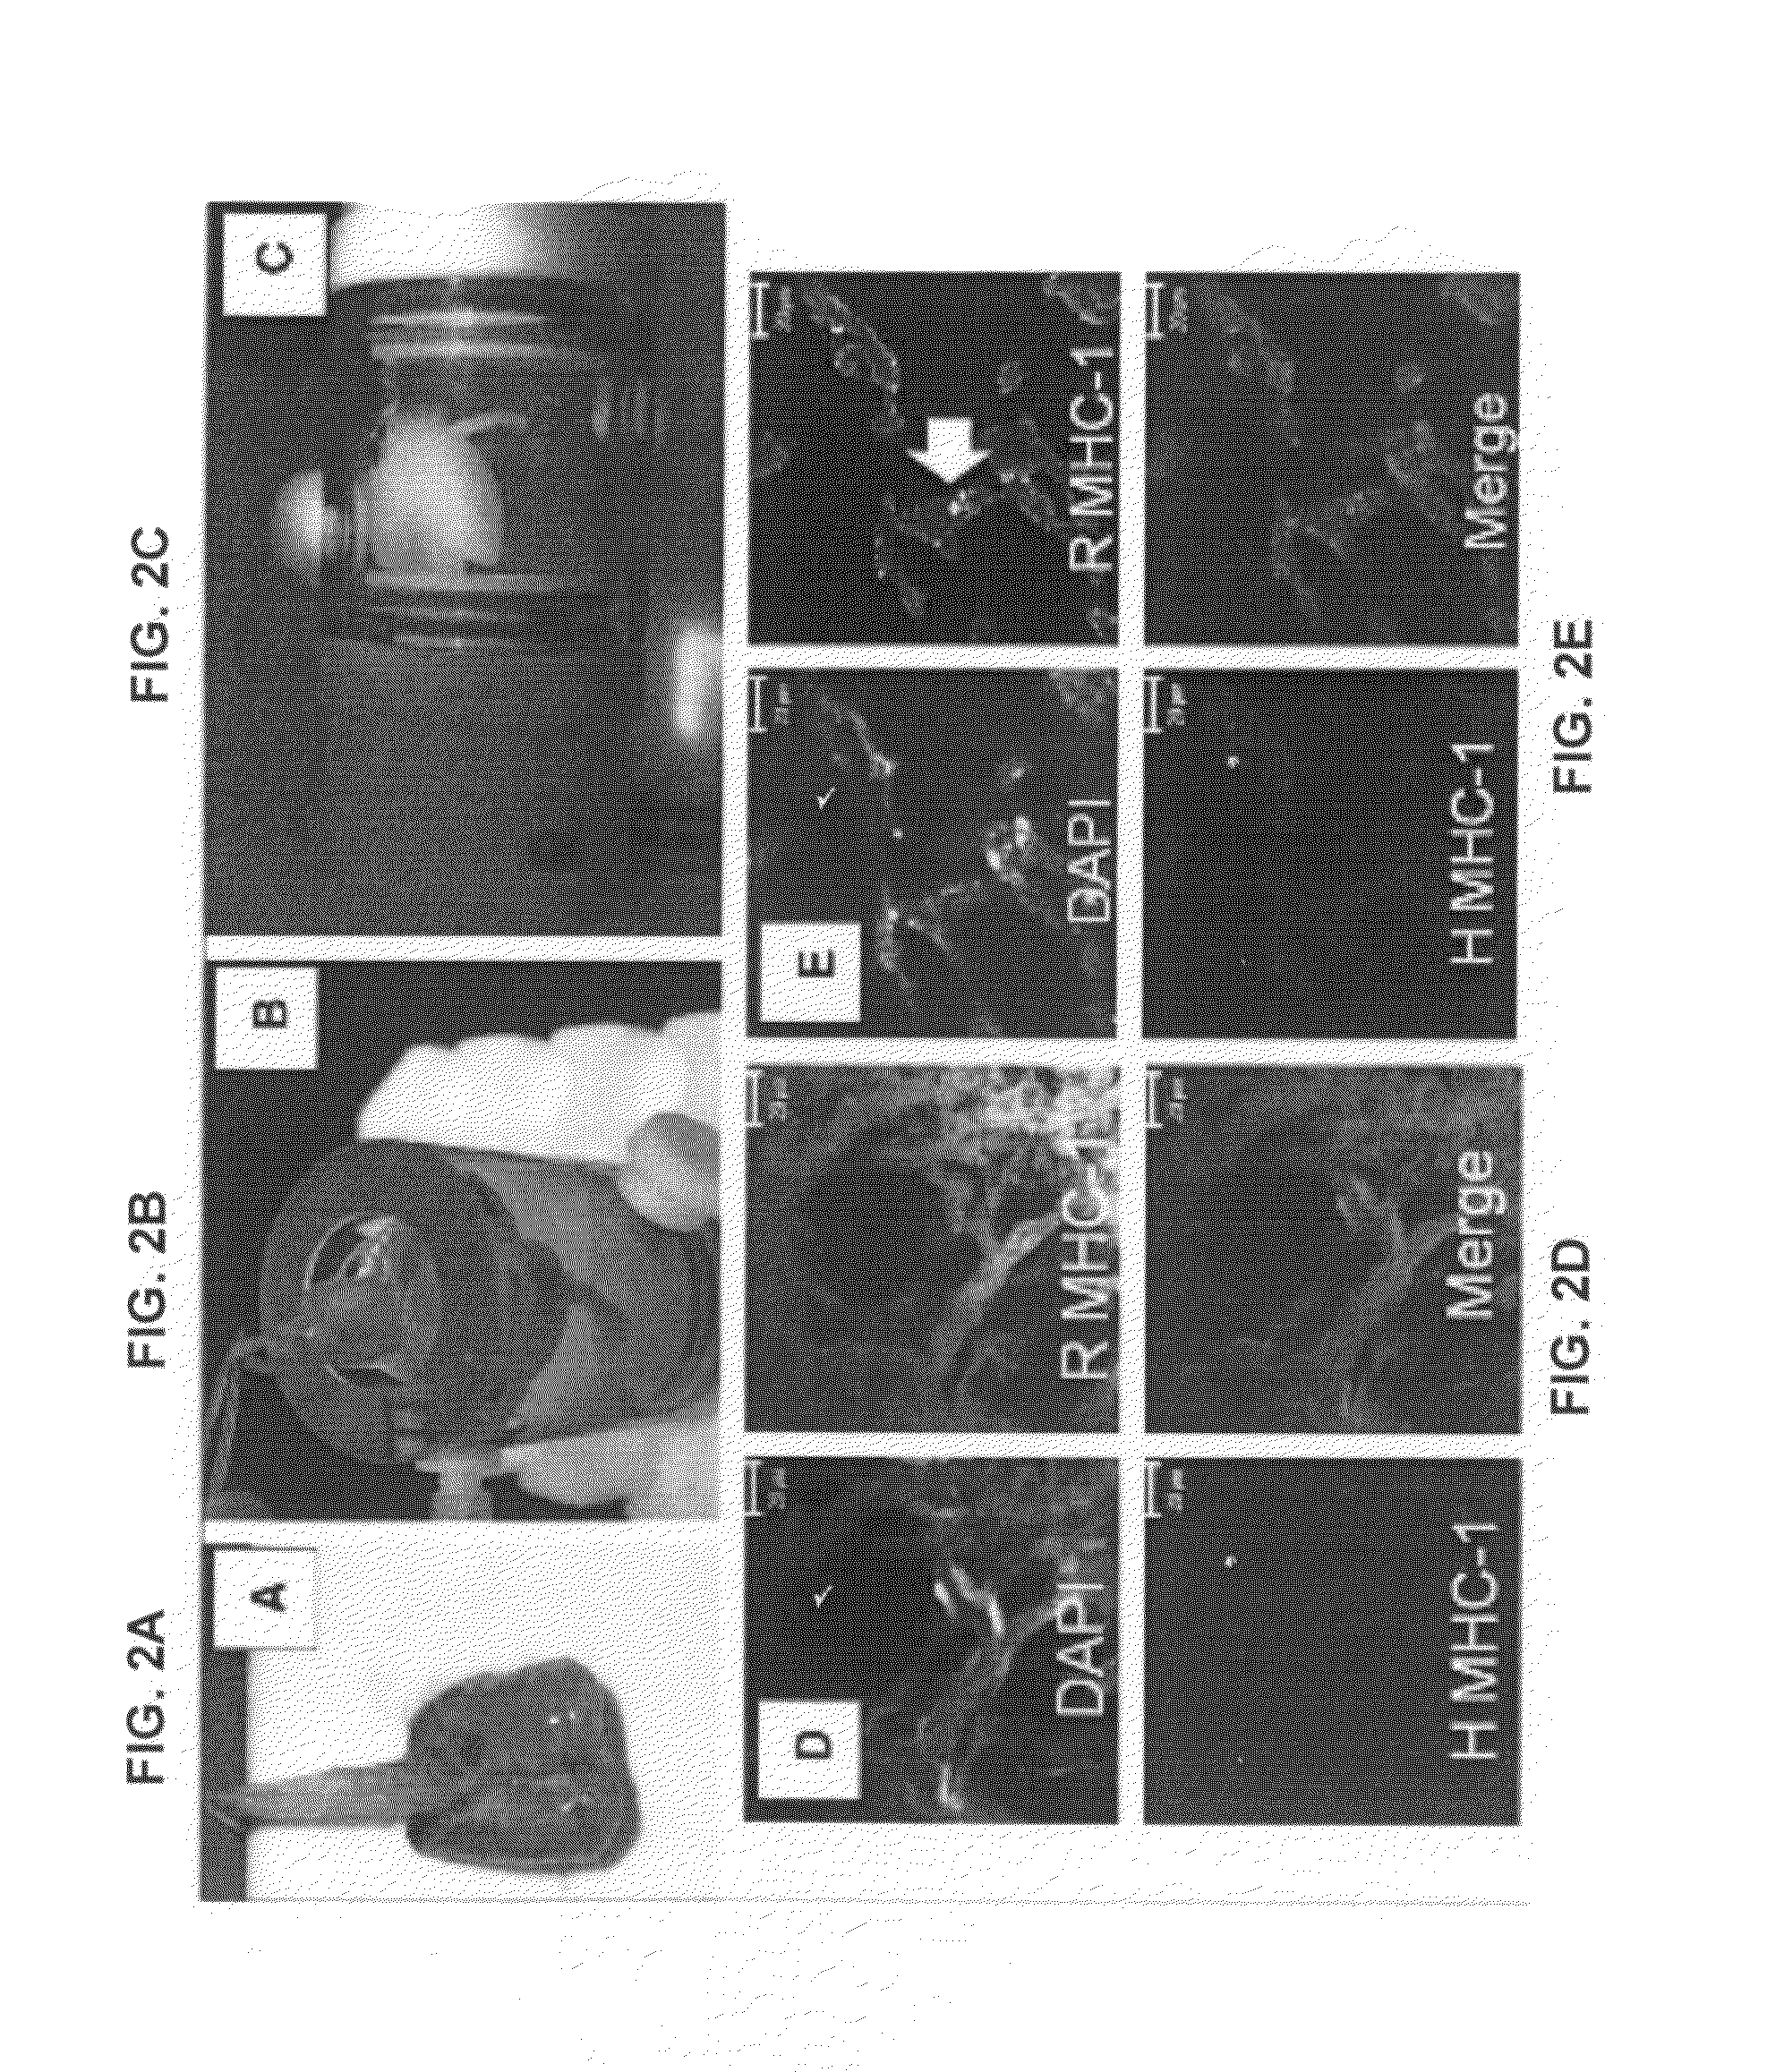 Production of and uses for decellularized lung tissue